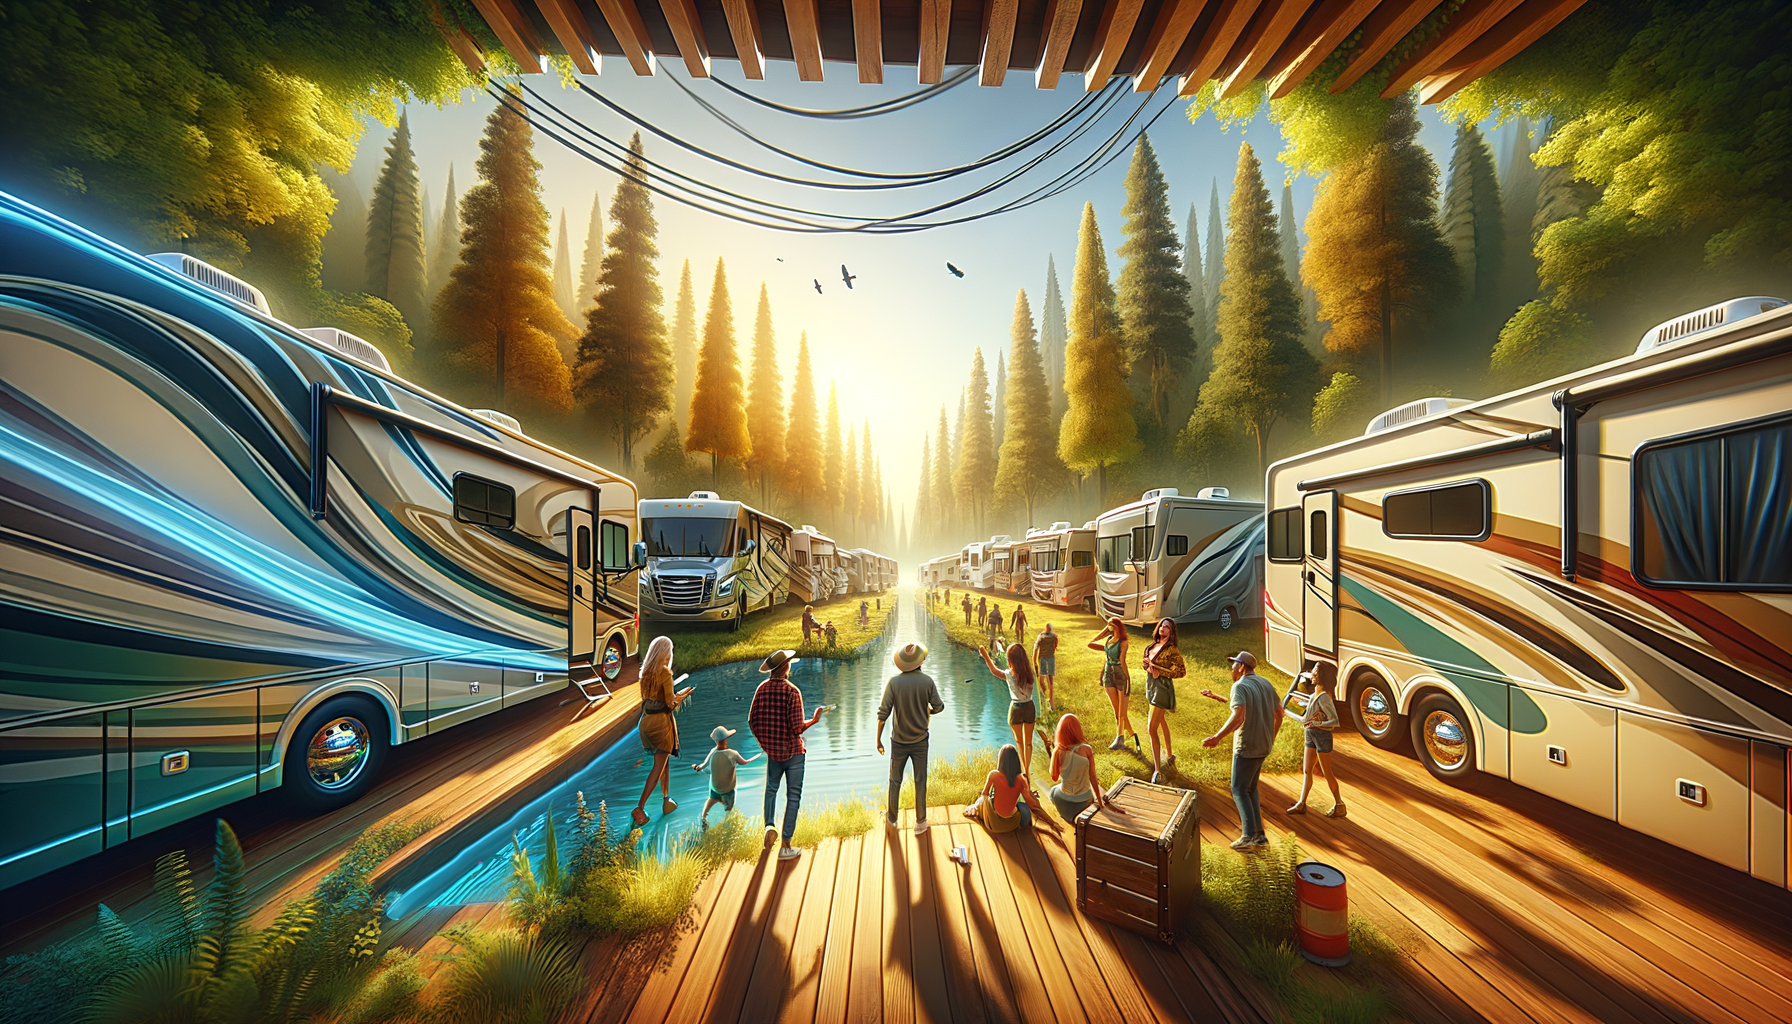 discover the latest in rv gear and get ready for an adventure at the austin rv expo.